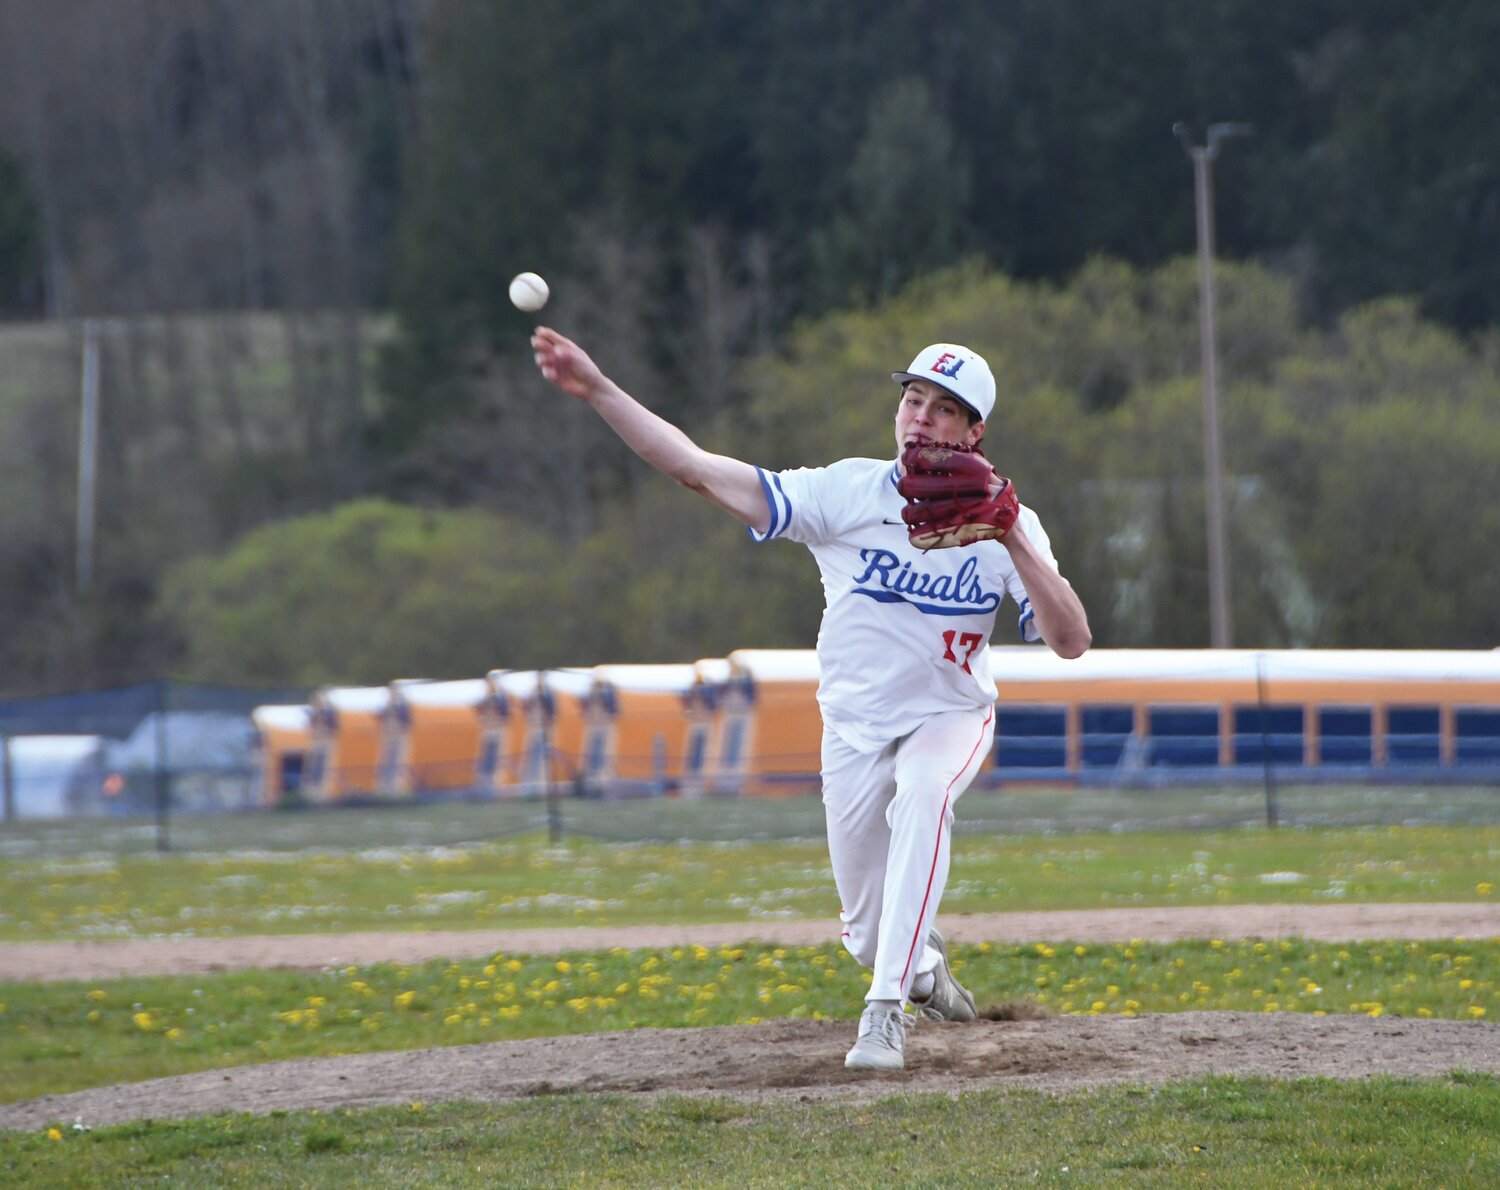 EJ senior Rhian Popp darts a pitch in the strike zone during the opening inning versus Bellevue Christian.